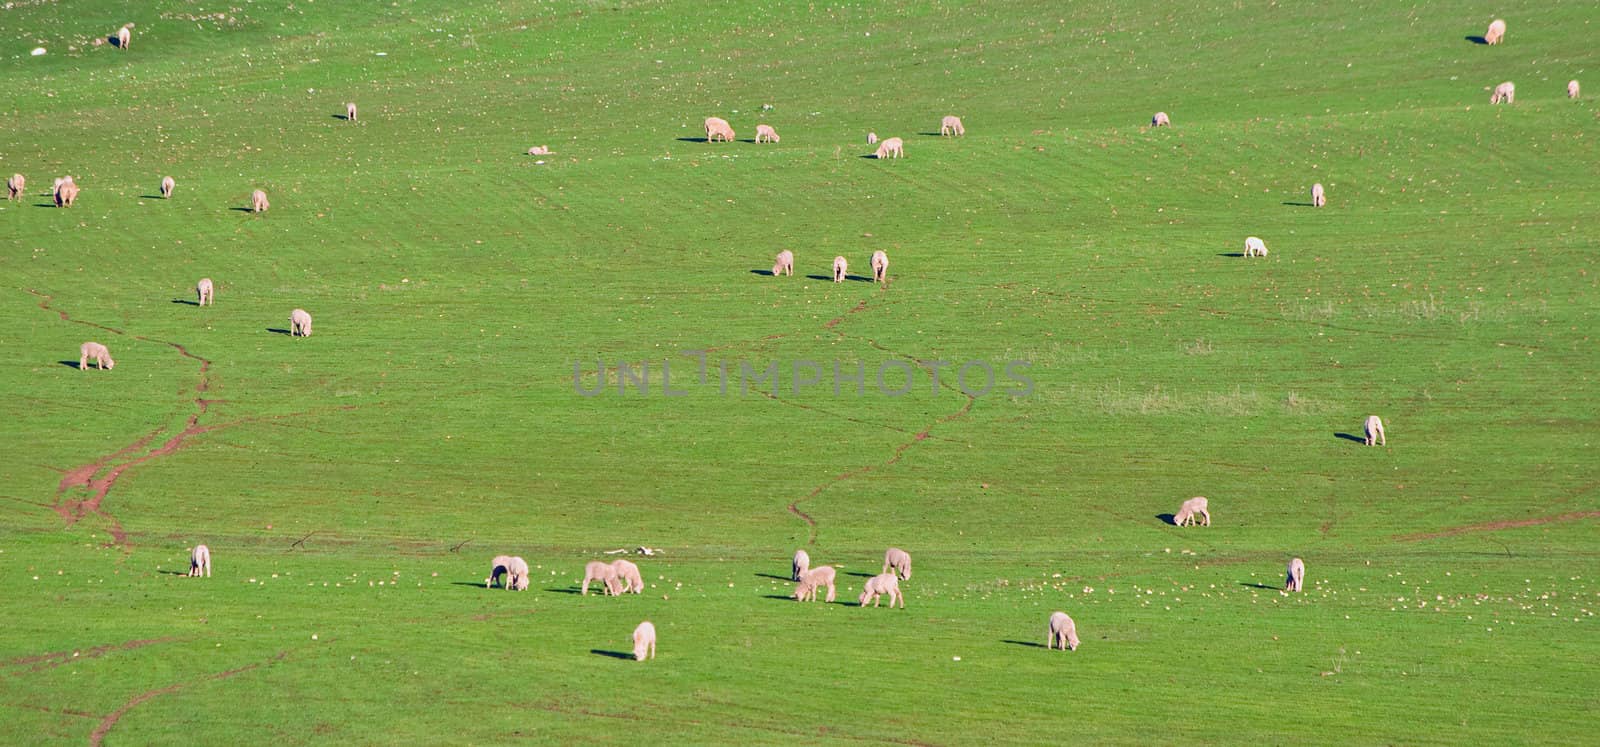 sheep in the field by clearviewstock